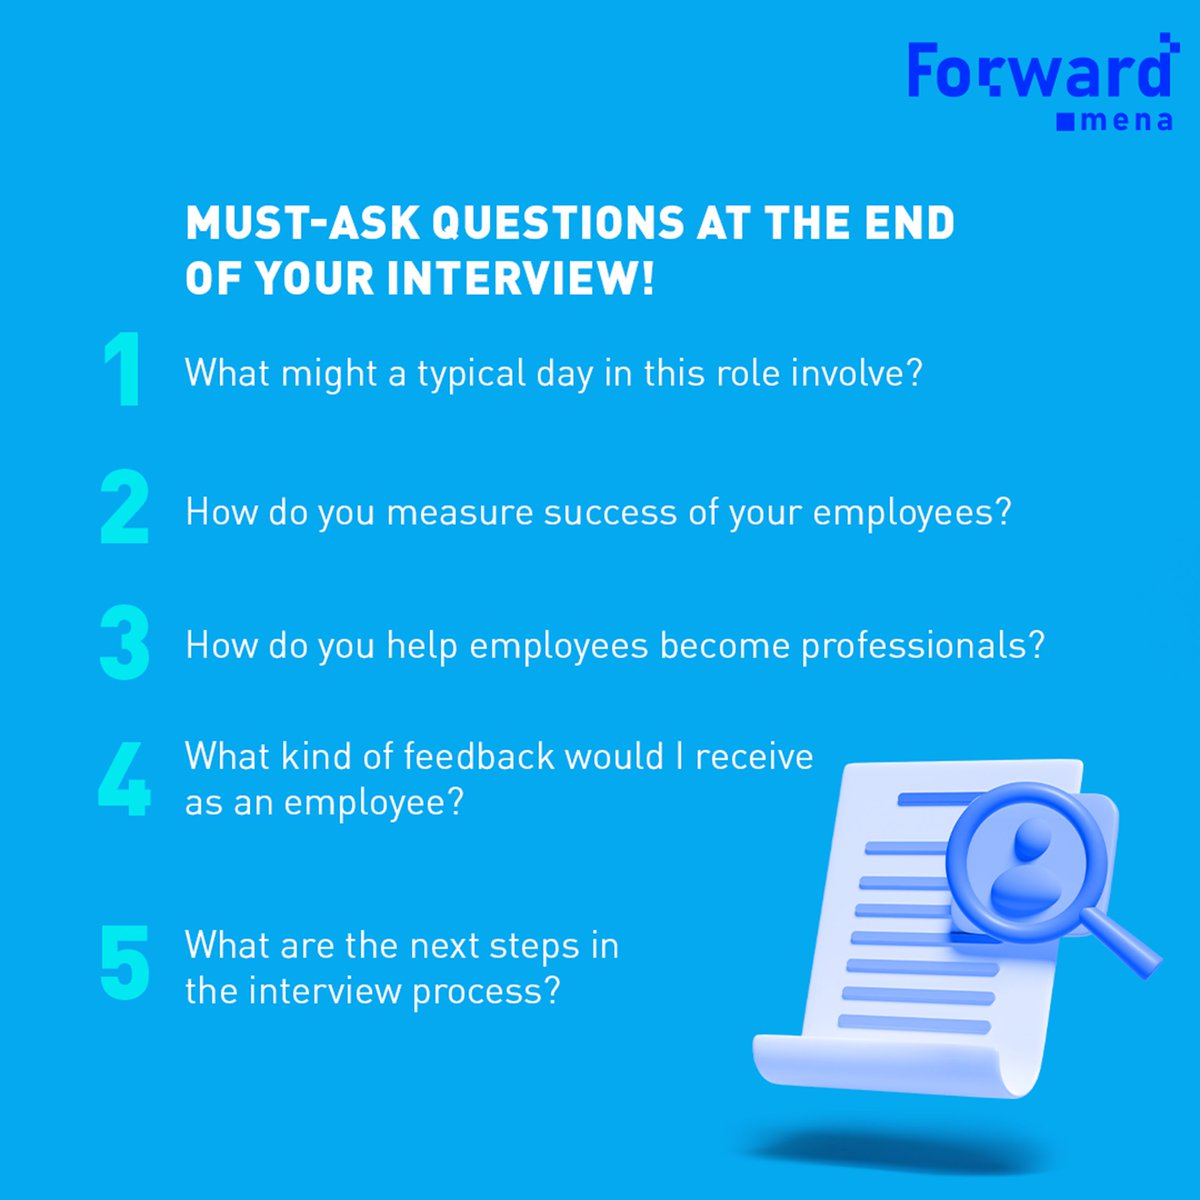 Closing a job interview? Remember to ask these key points before you leave!

#ForwardMena #InterviewTips #JobSeekerAdvice